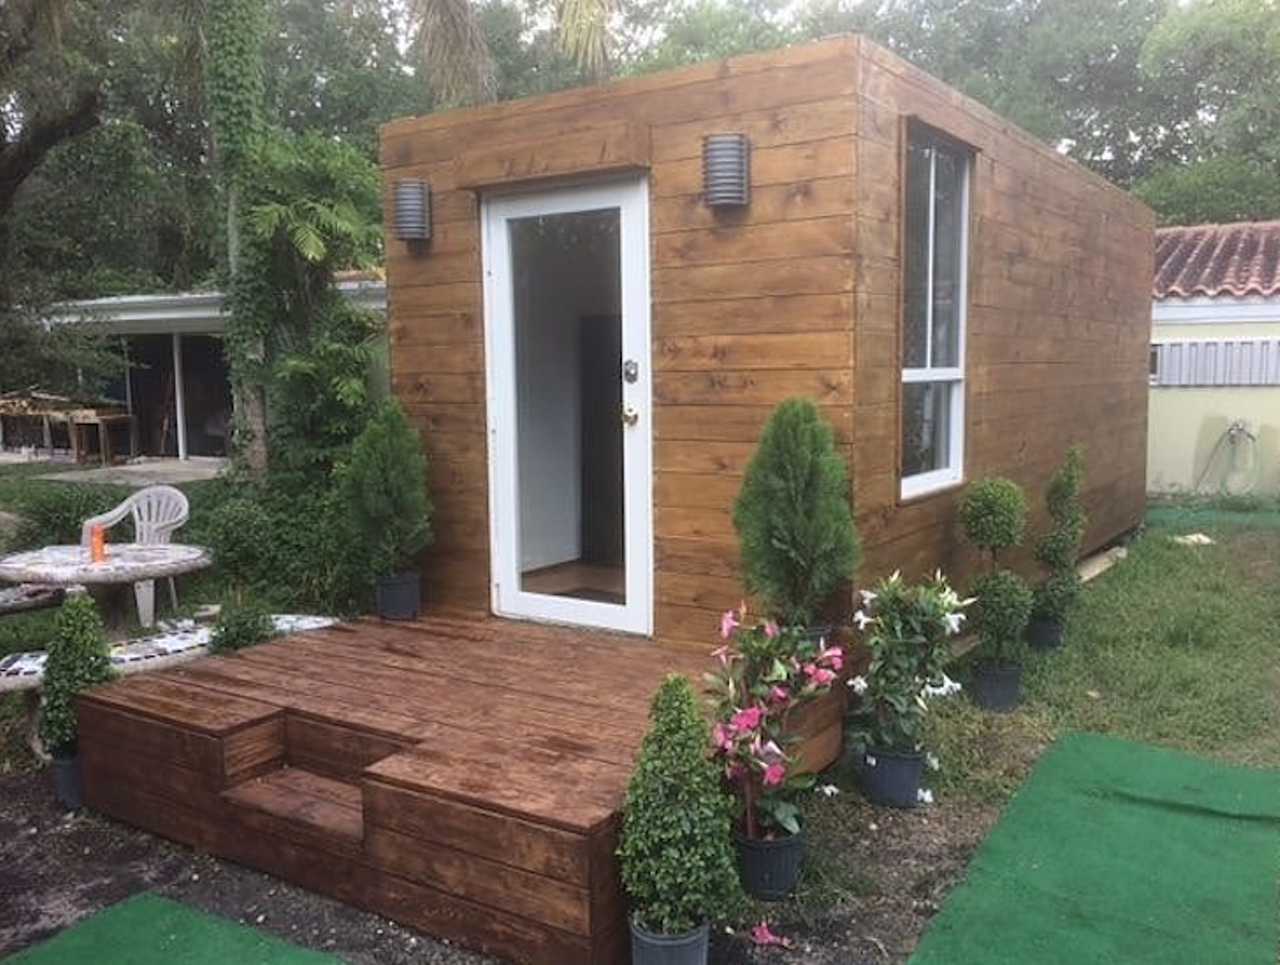 https://media1.orlandoweekly.com/orlando/imager/10-tiny-houses-available-right-now-in-florida-that-are-cooler-than-your-apartment/u/zoom/30807781/screen-shot-2016-11-07-at-2.03.39-pm.png?cb=1648363543